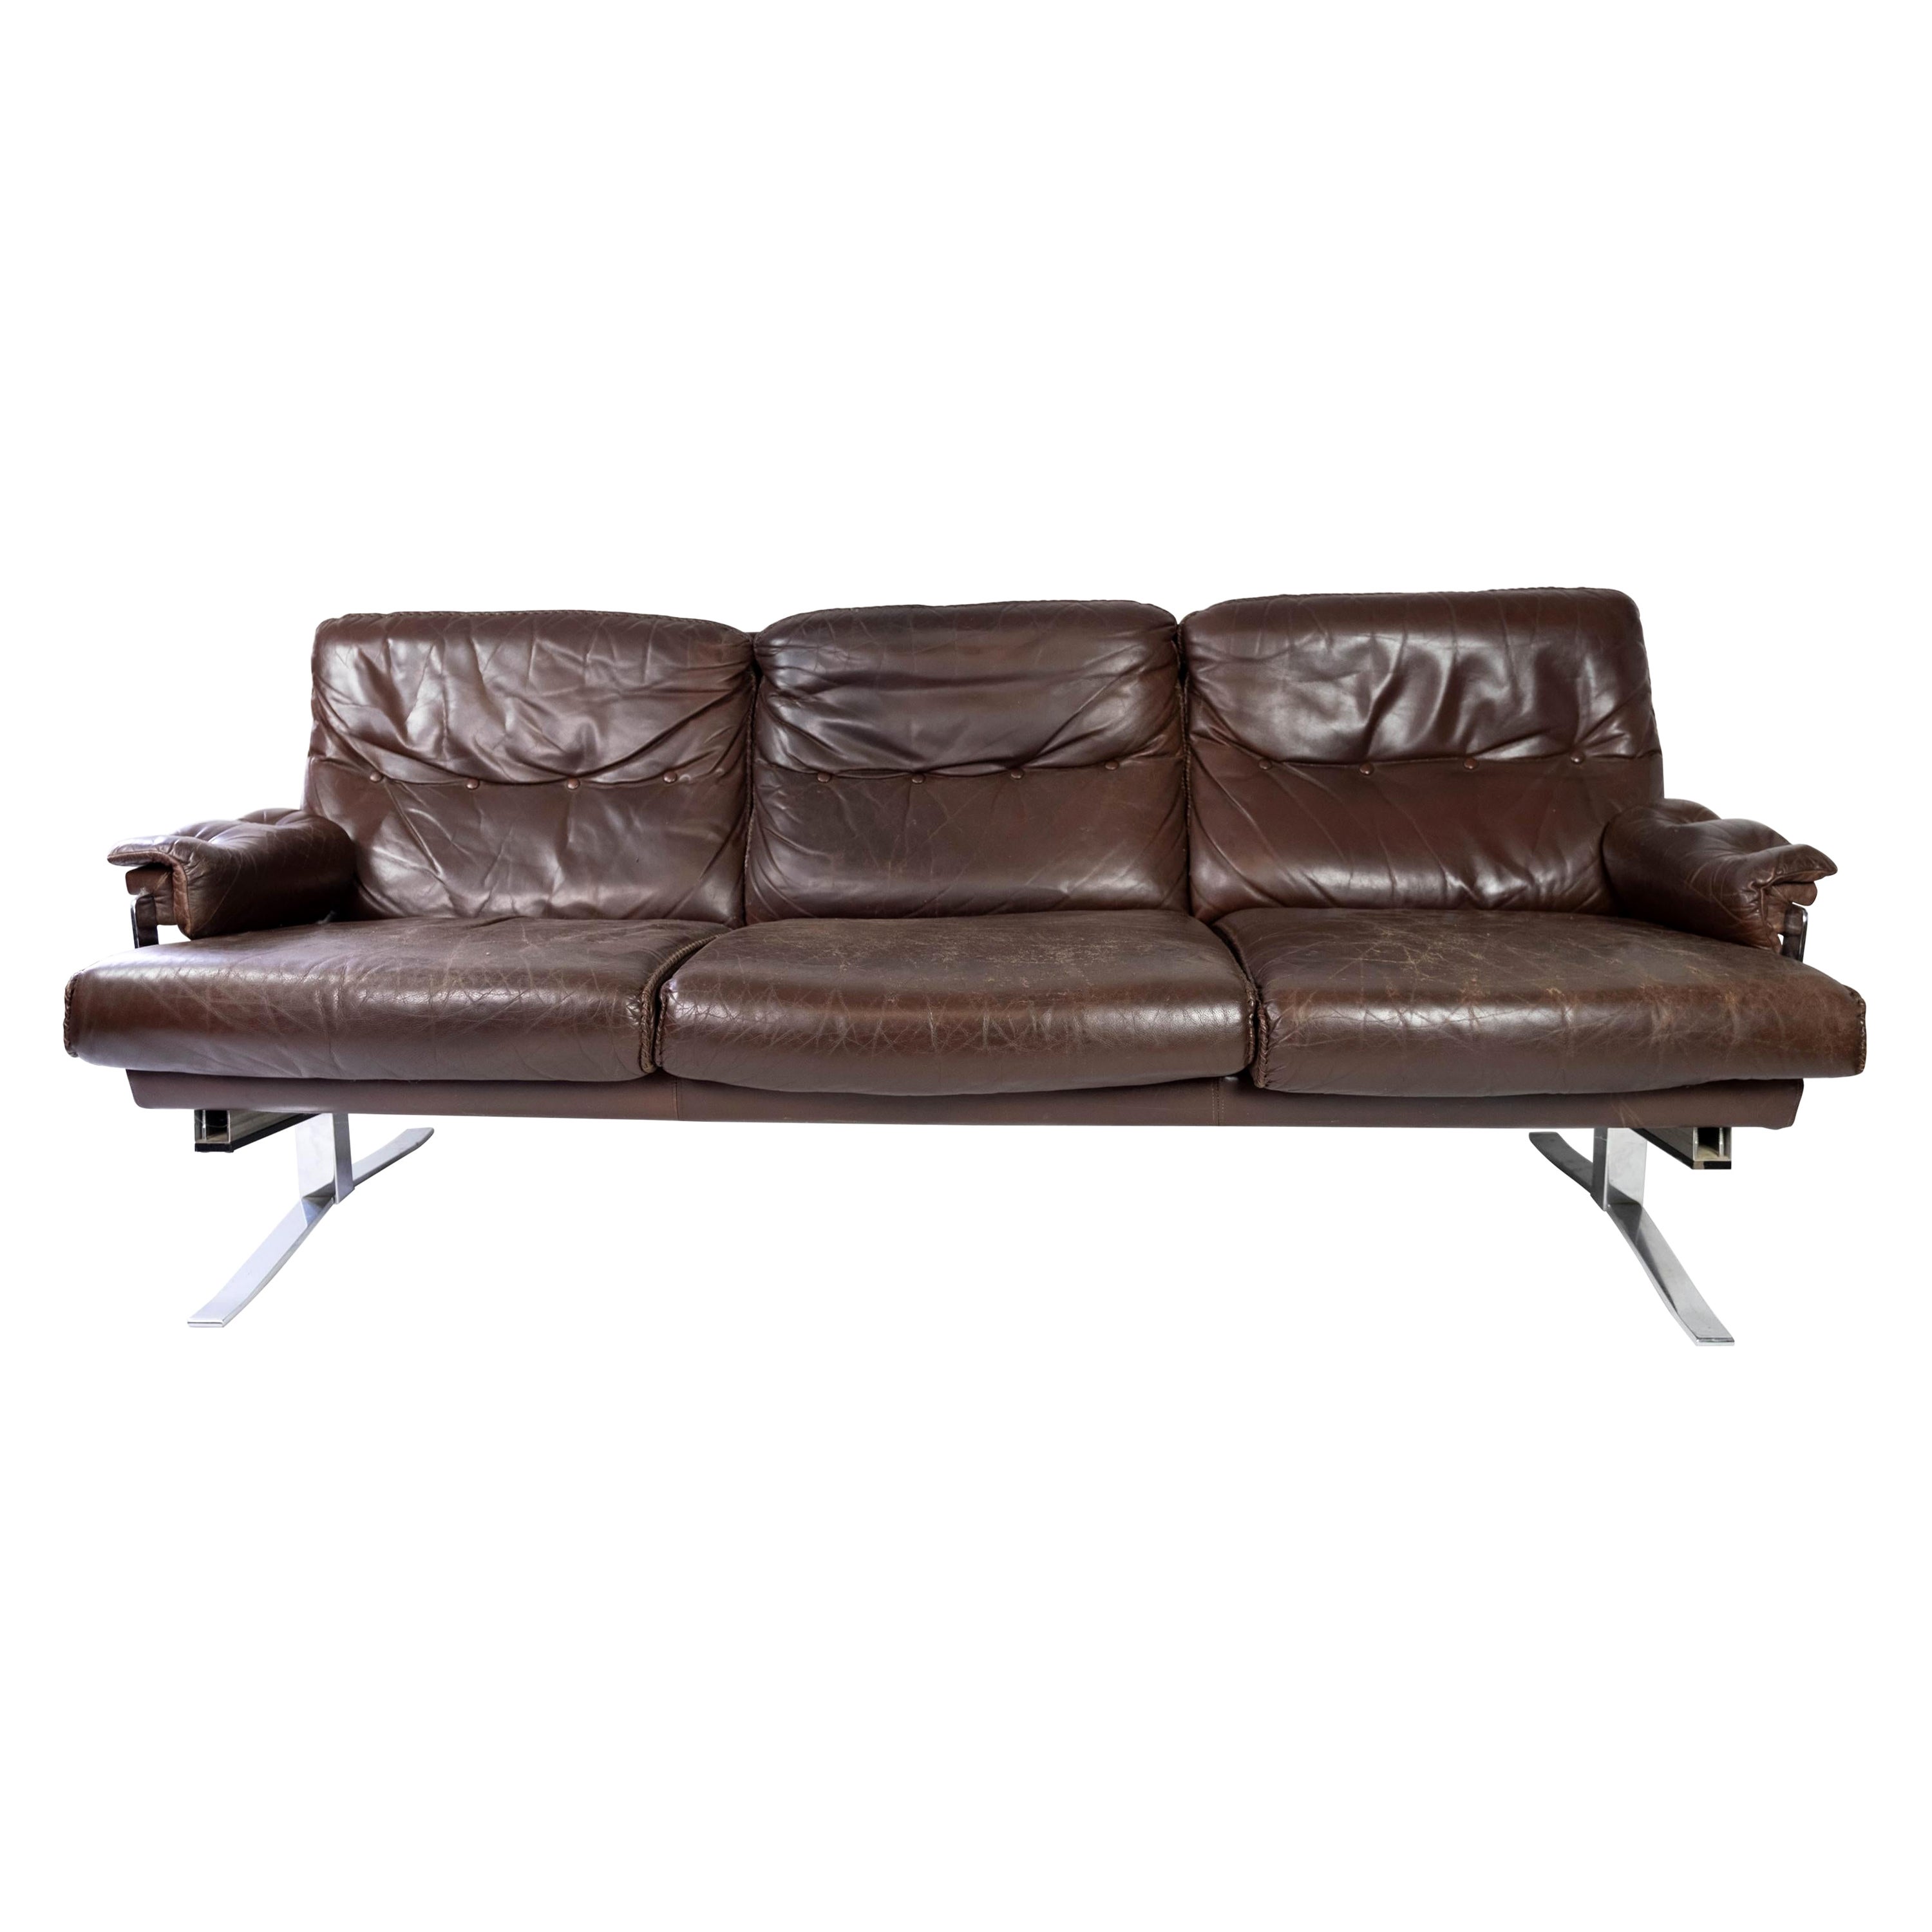 3. Seater Sofa Made in Patinated Brown Leather By Arne Norells From 1970s